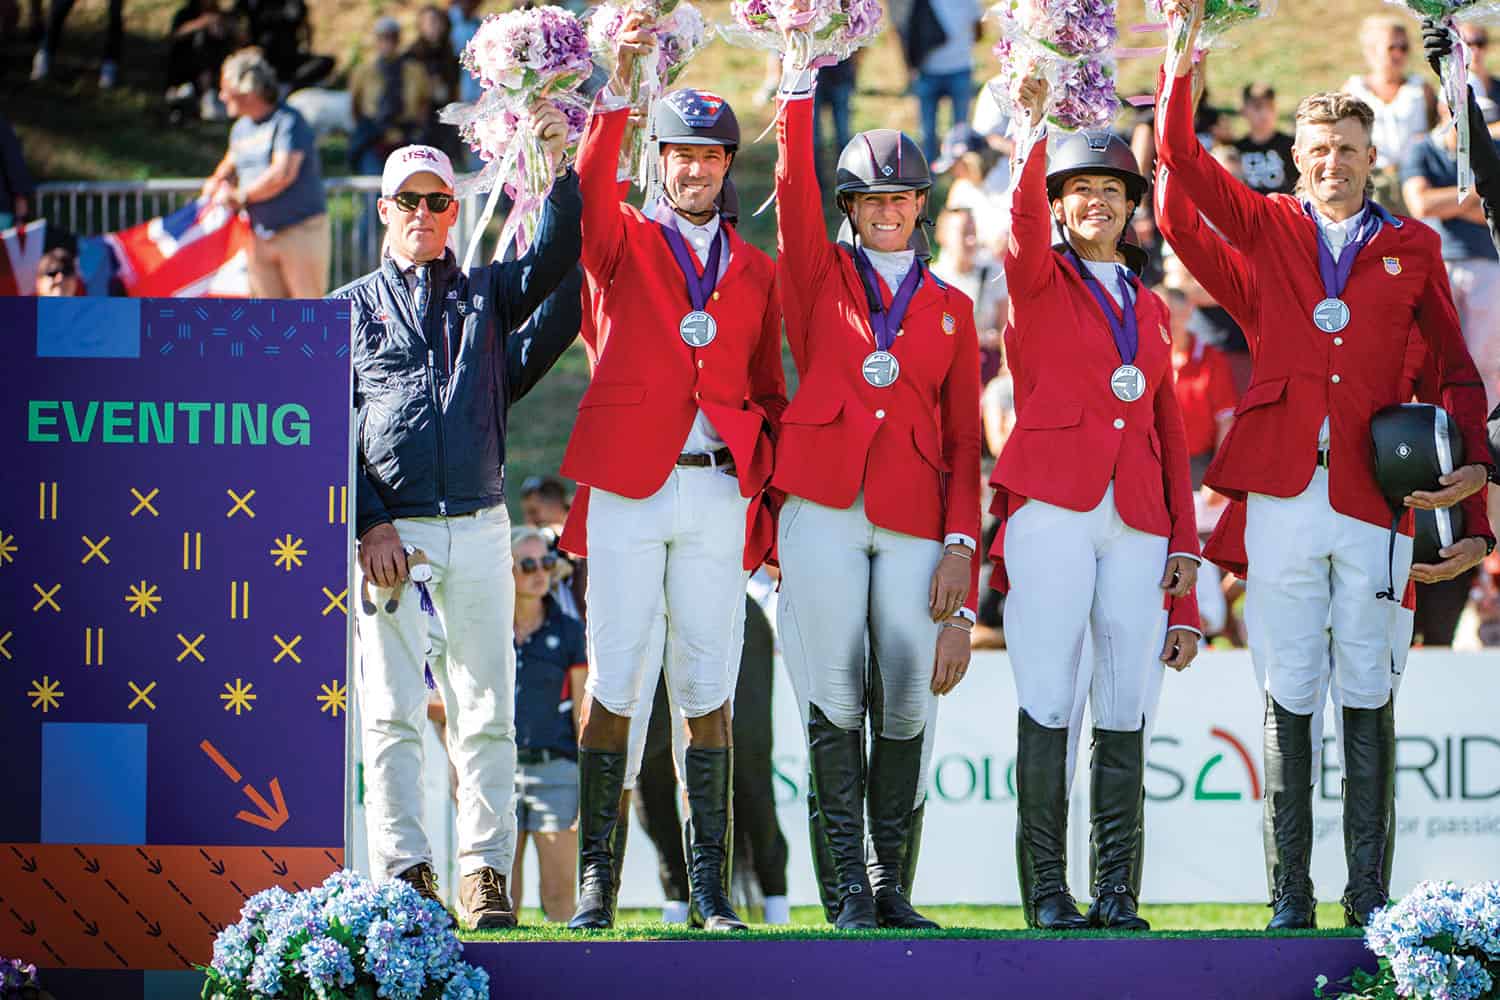 Land Rover U.S. Eventing Team Wins Silver at Pratoni 2022 in Rome, Italy qualifying for Paris 2024 Olympic Games